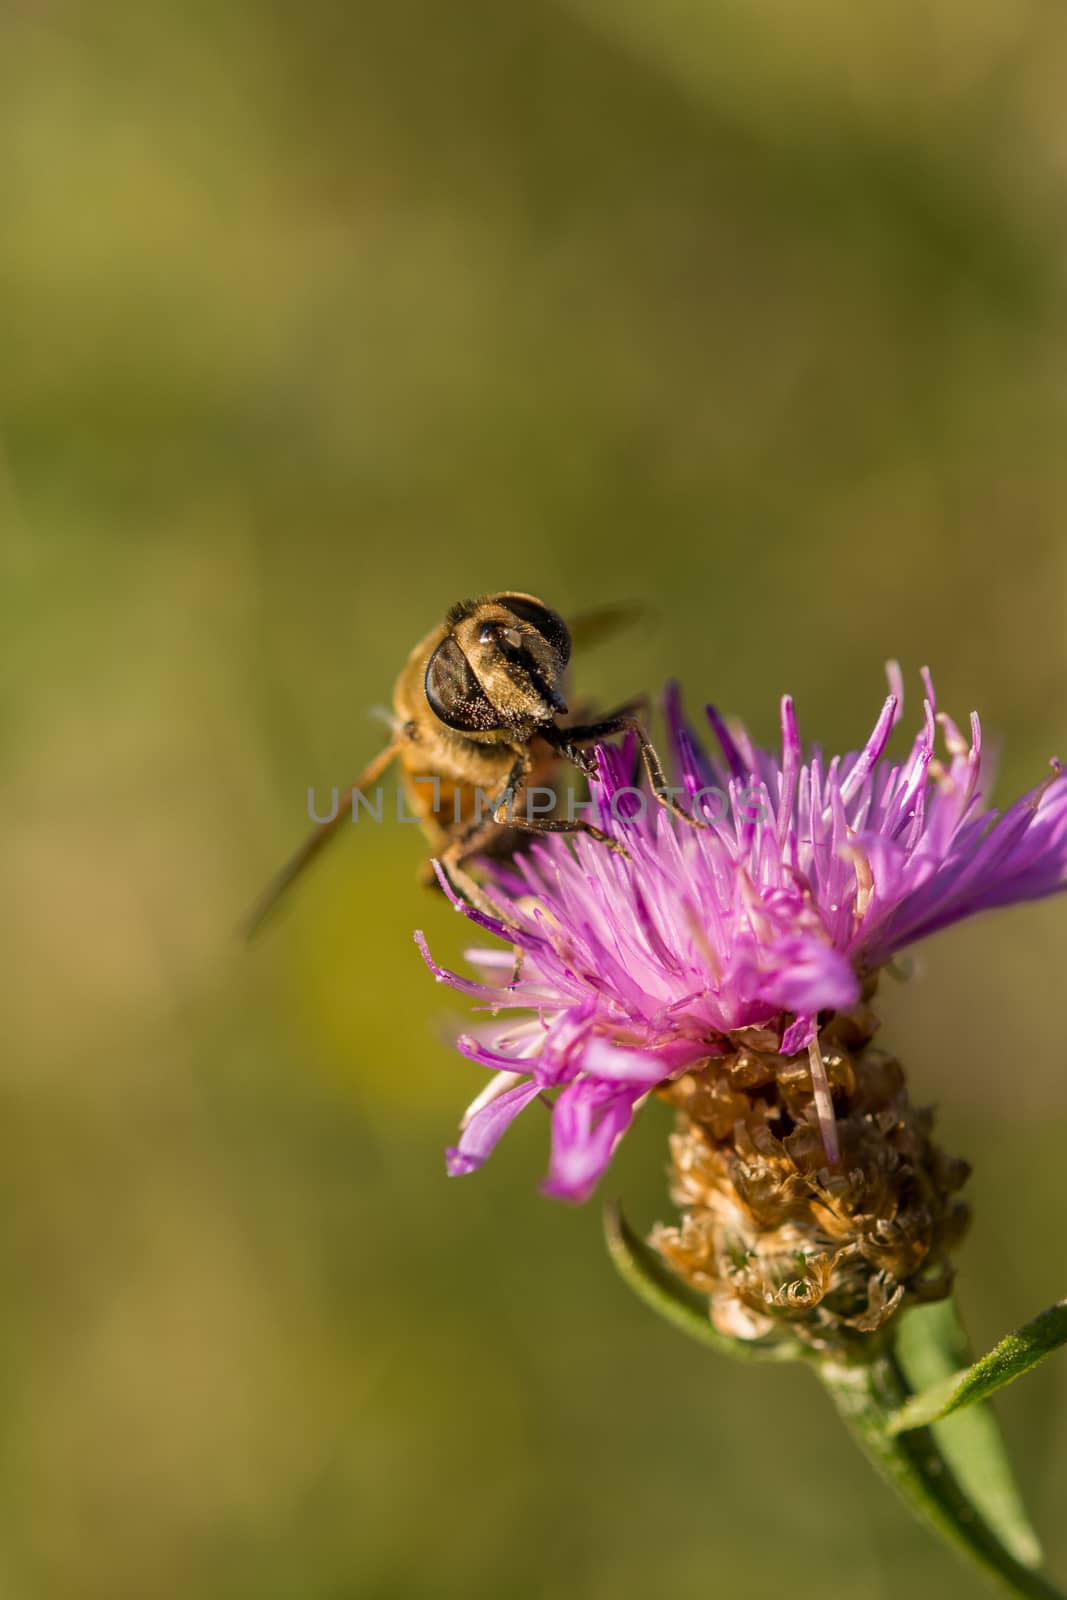 Solitary bee on a pink thistle flower